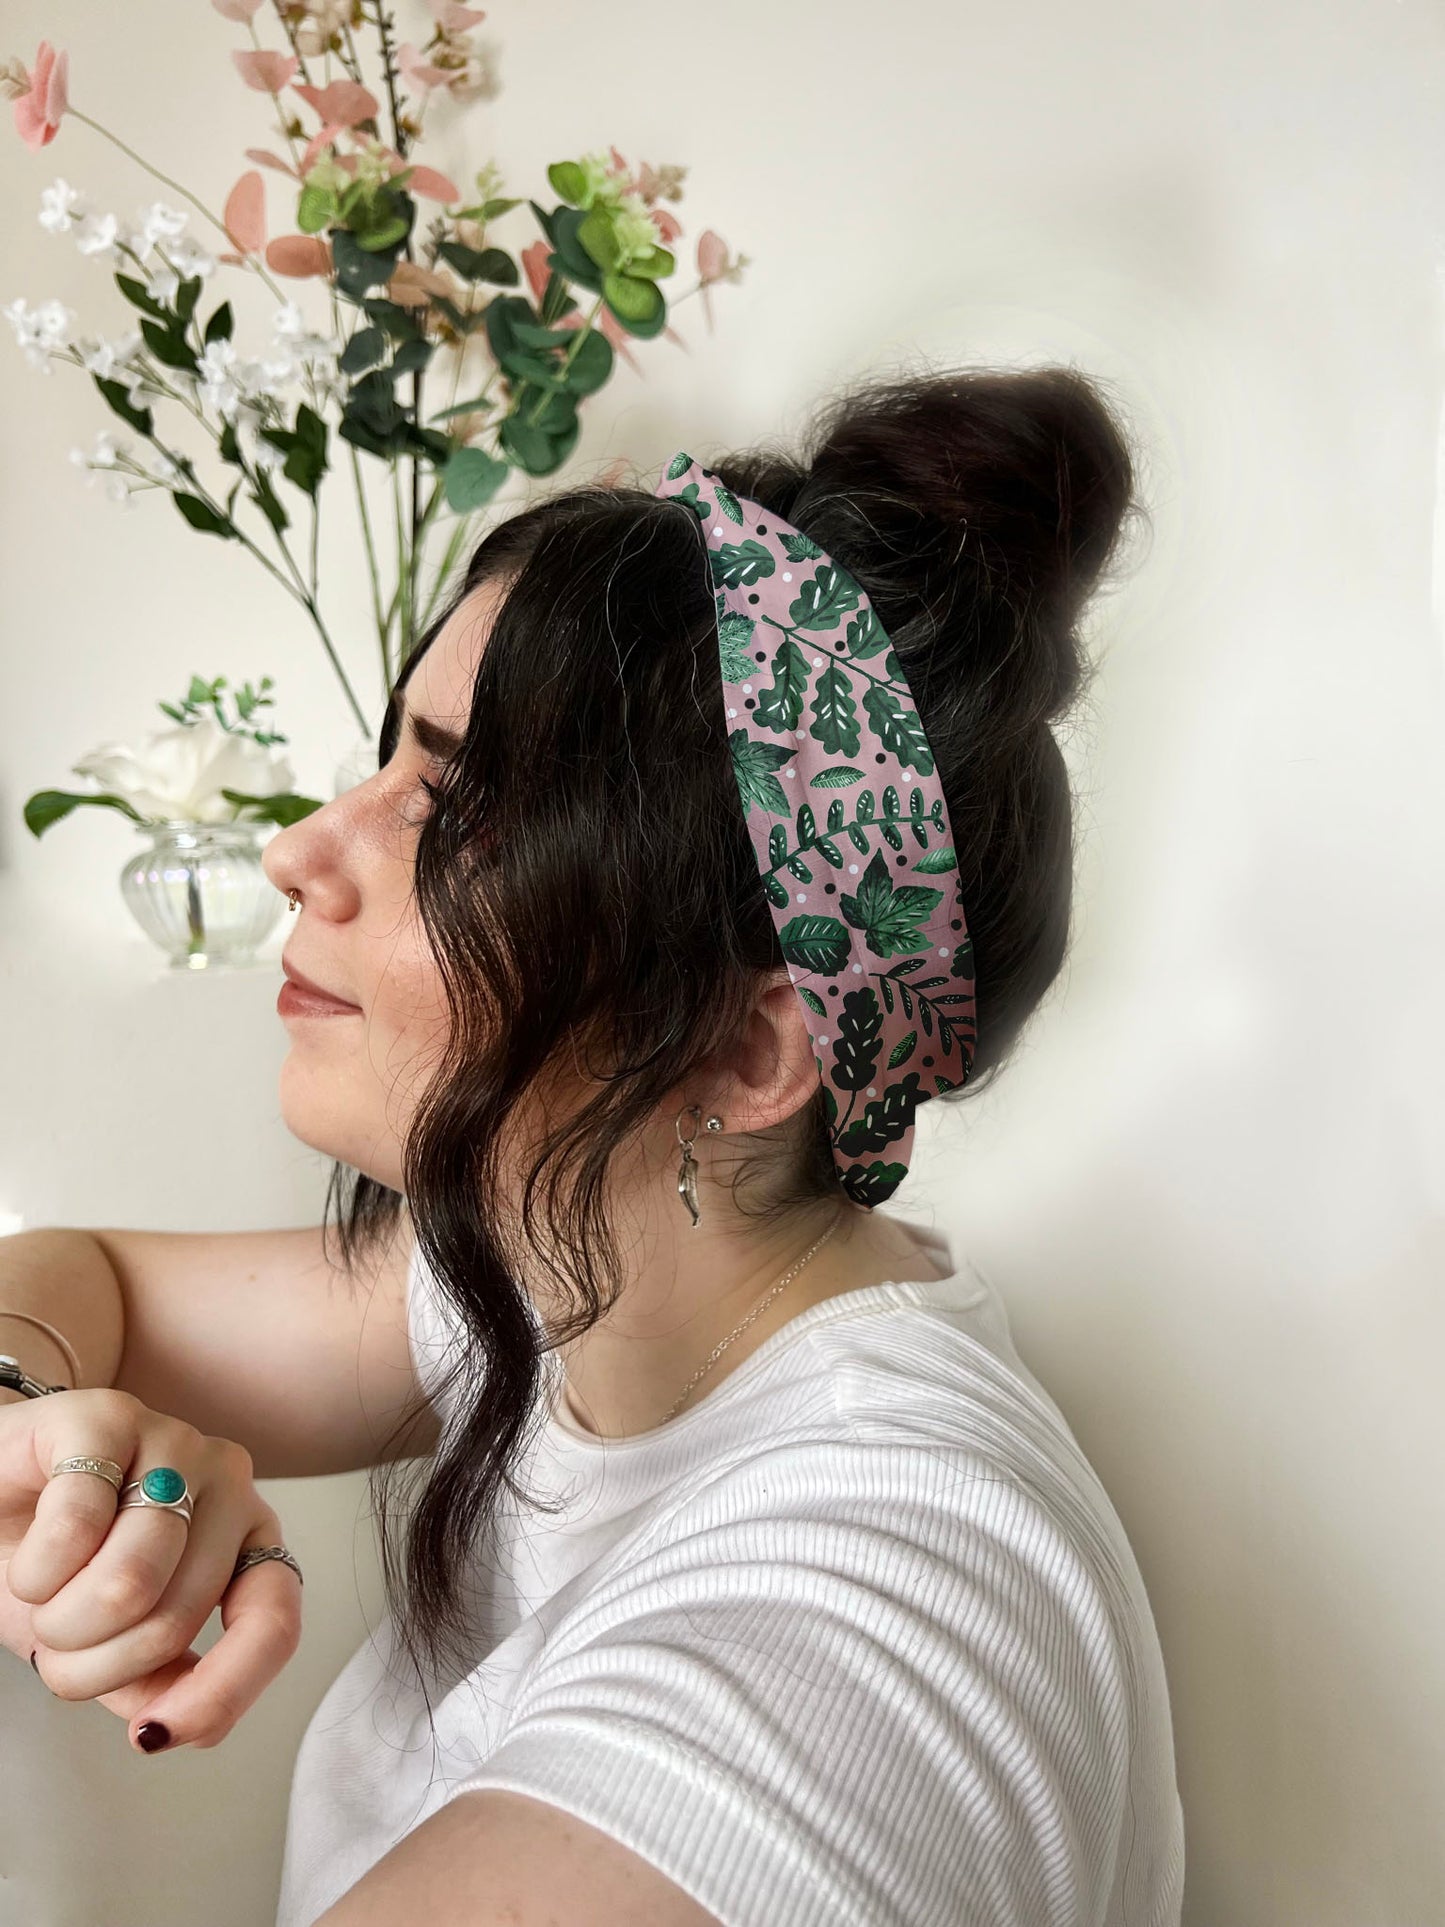 green foliage patterned headband on dark haired girl. shop gifts just because for her with this cute headband look.